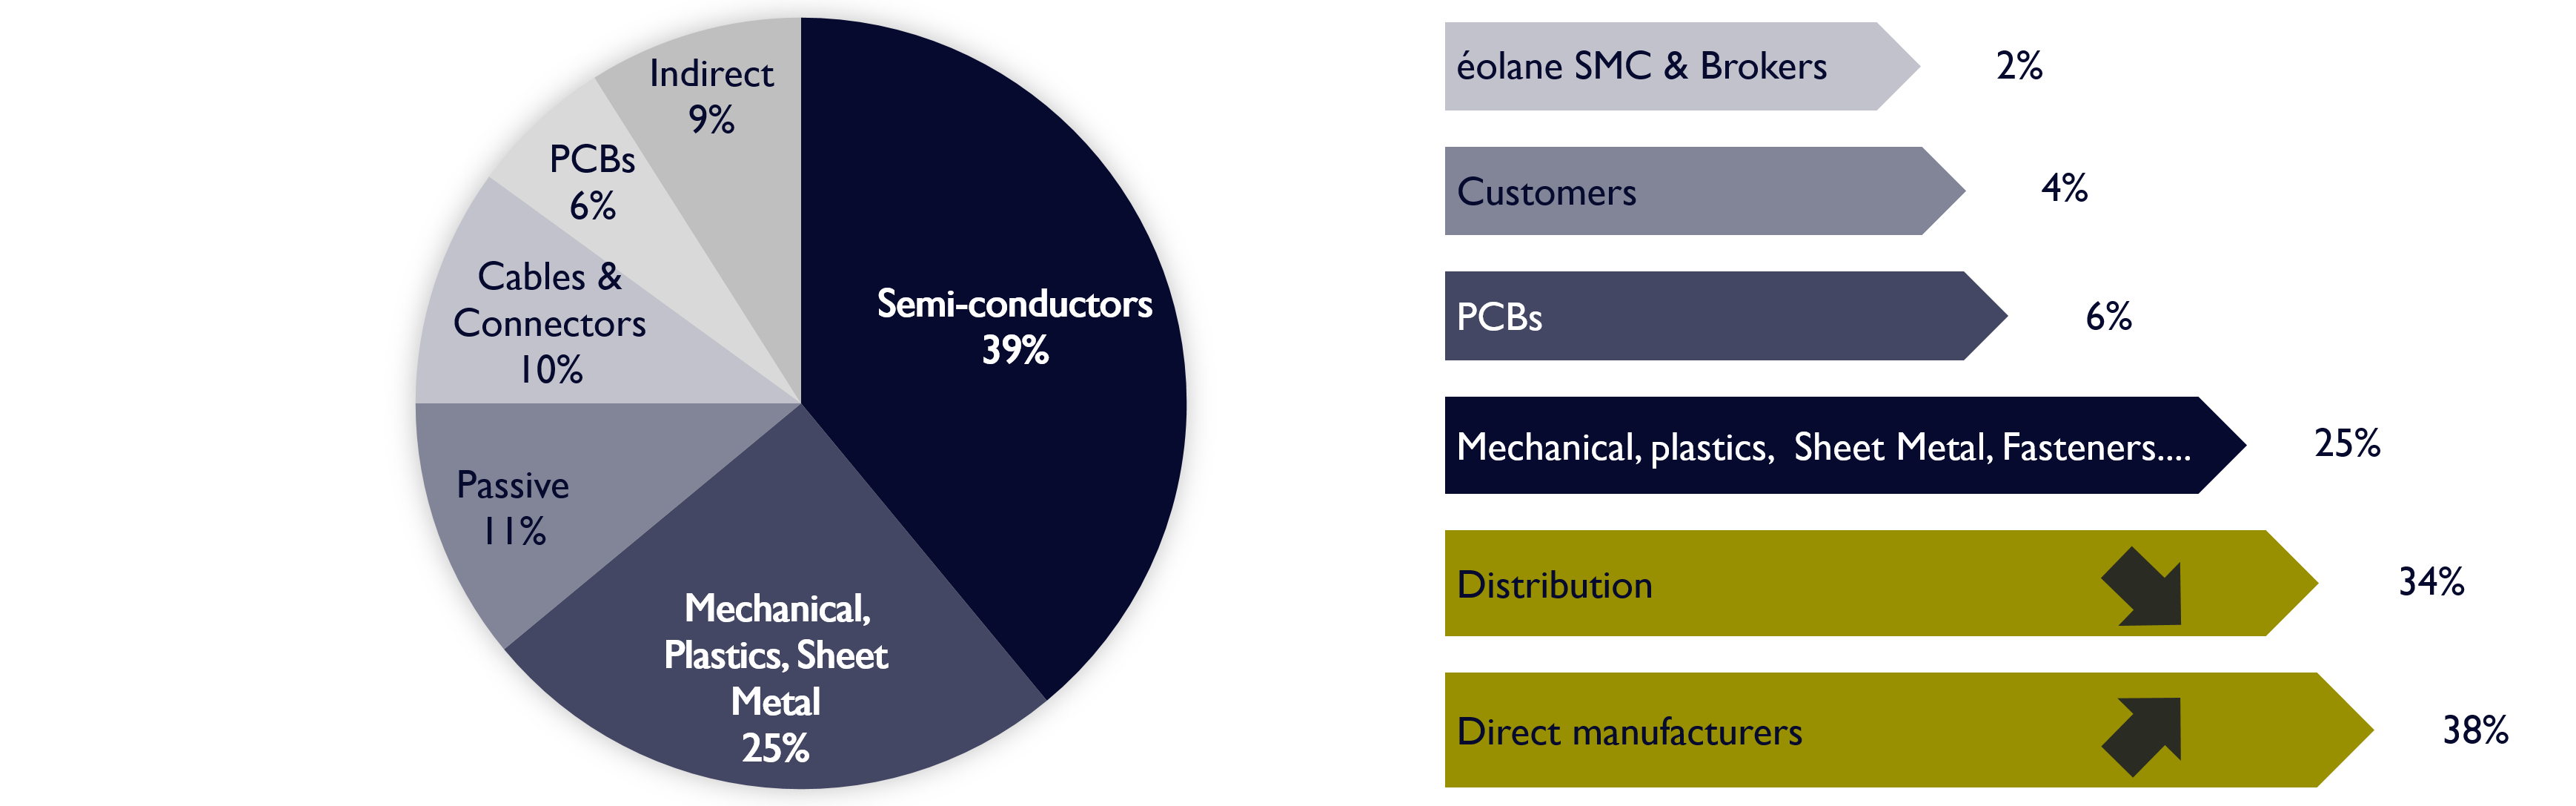 Purchasing breakdown chart (39% semiconductors, 25% mechanical, plastics and sheet metal, 11% passive, 10% cables and connectors, 6% PCBs, 9% indirect) 